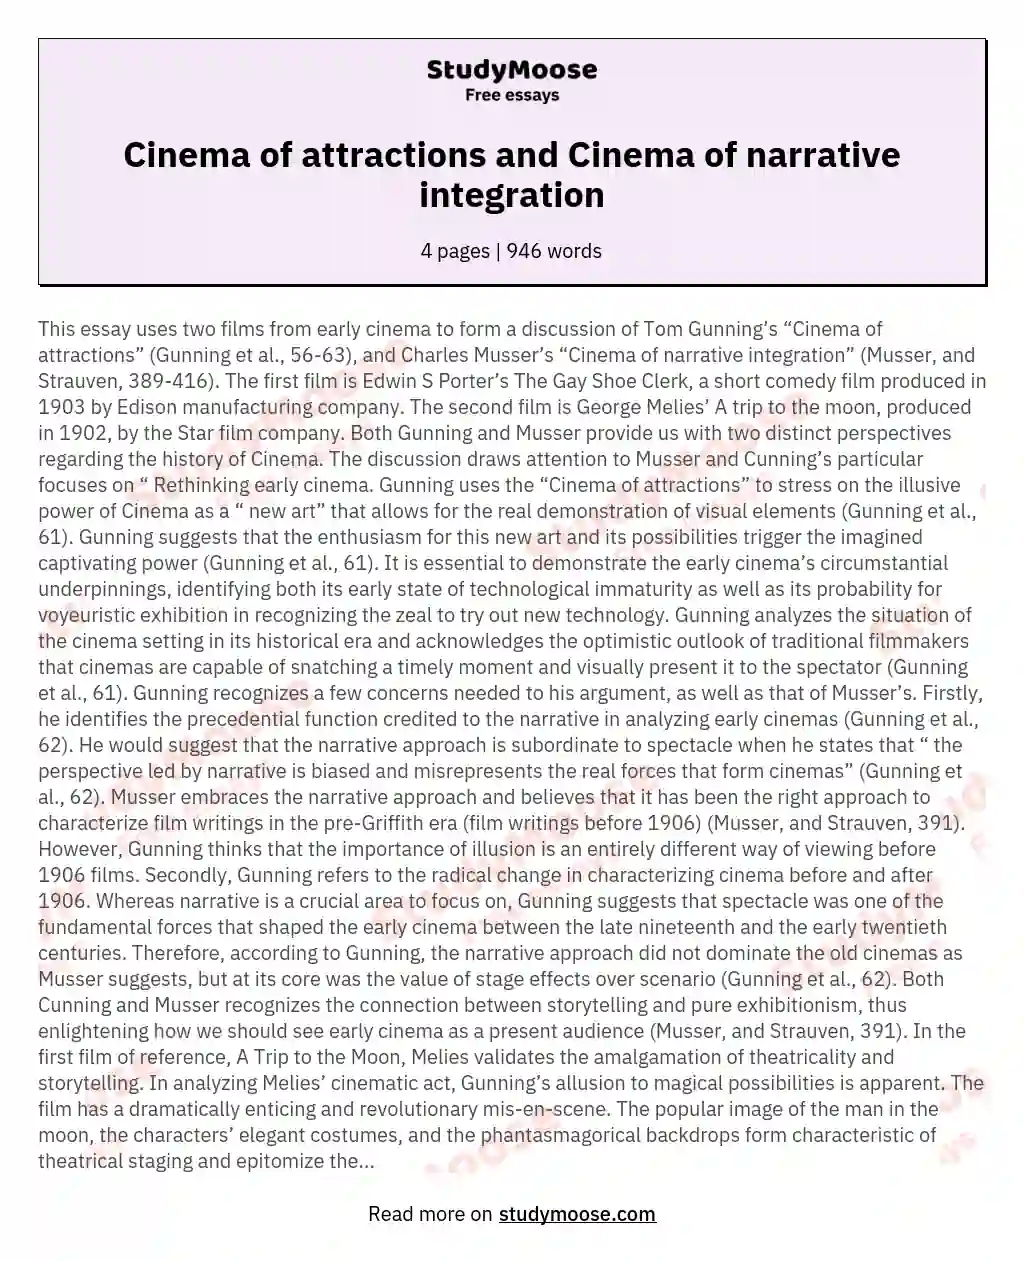 Cinema of attractions and Cinema of narrative integration